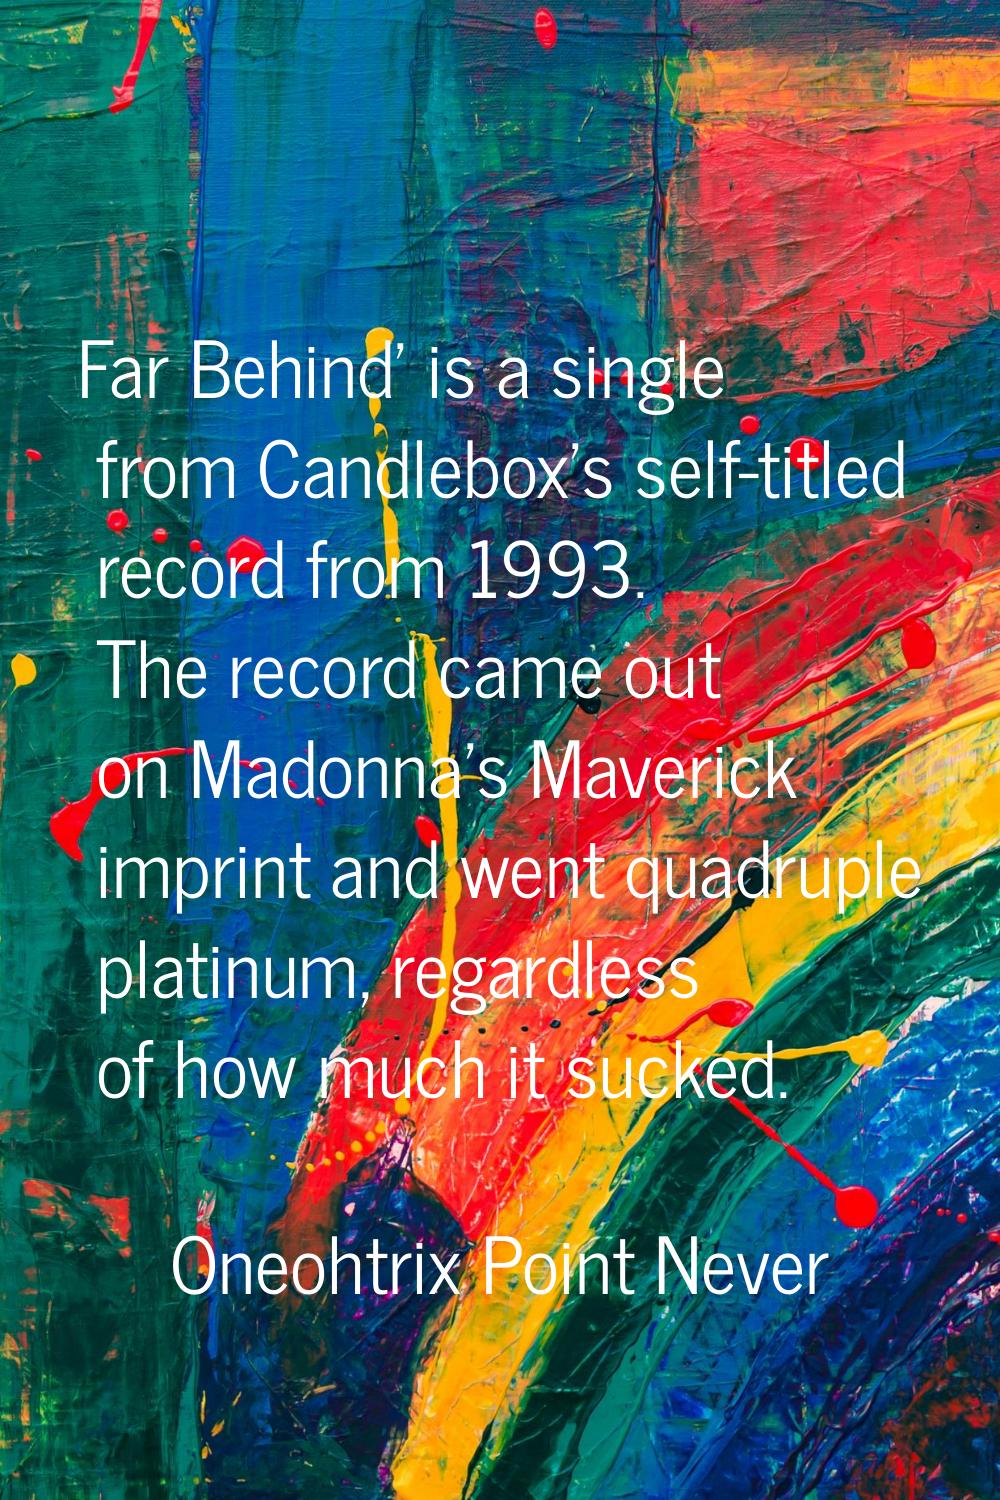 Far Behind' is a single from Candlebox's self-titled record from 1993. The record came out on Madon